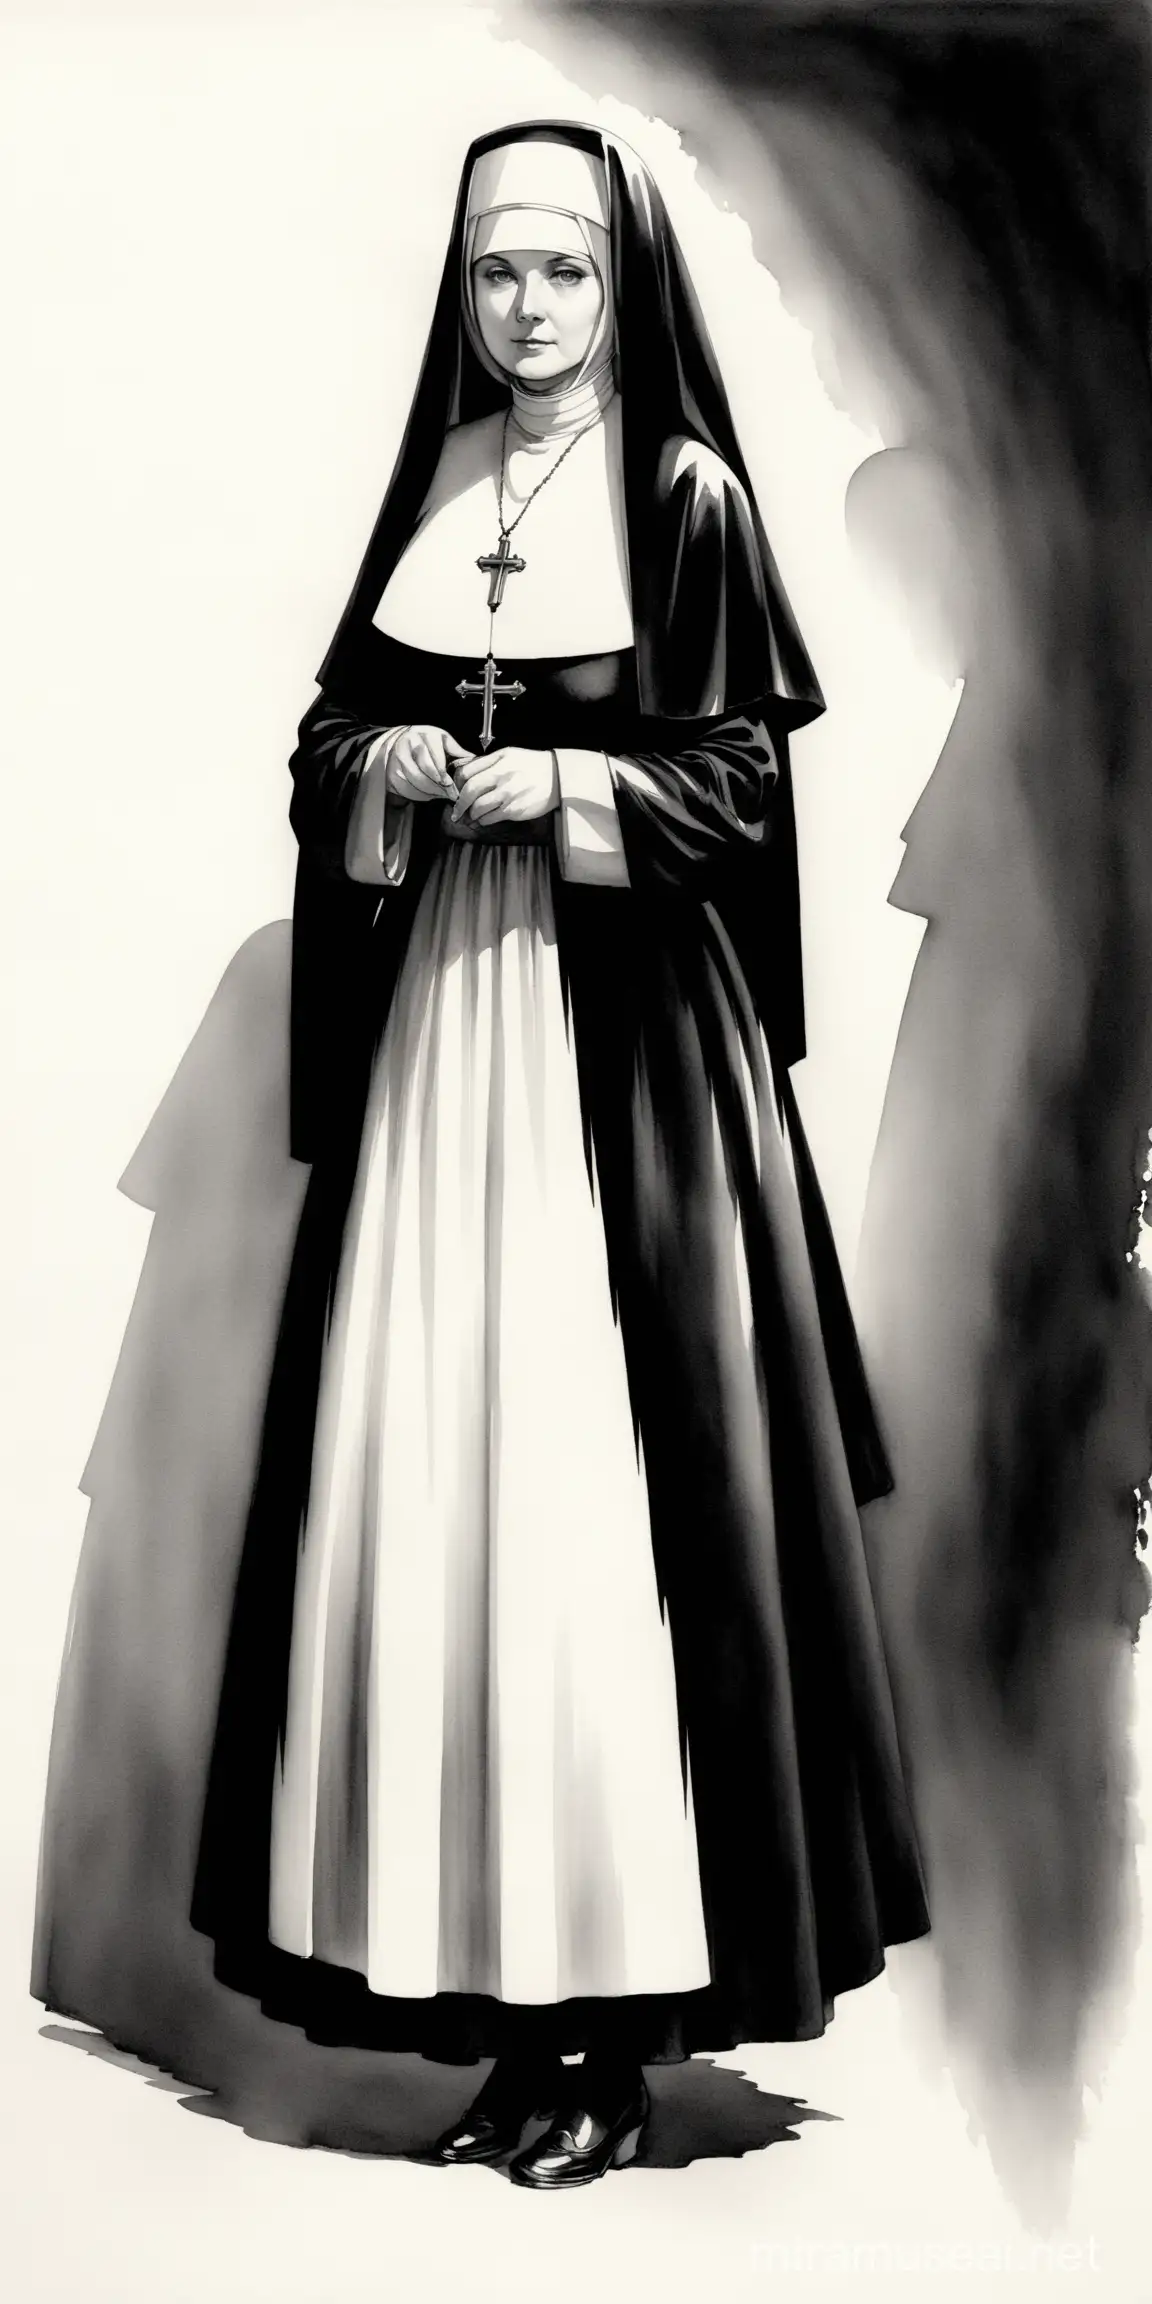 Mature nun, Victorian era, ink painting, black and white, more shadows, two shades